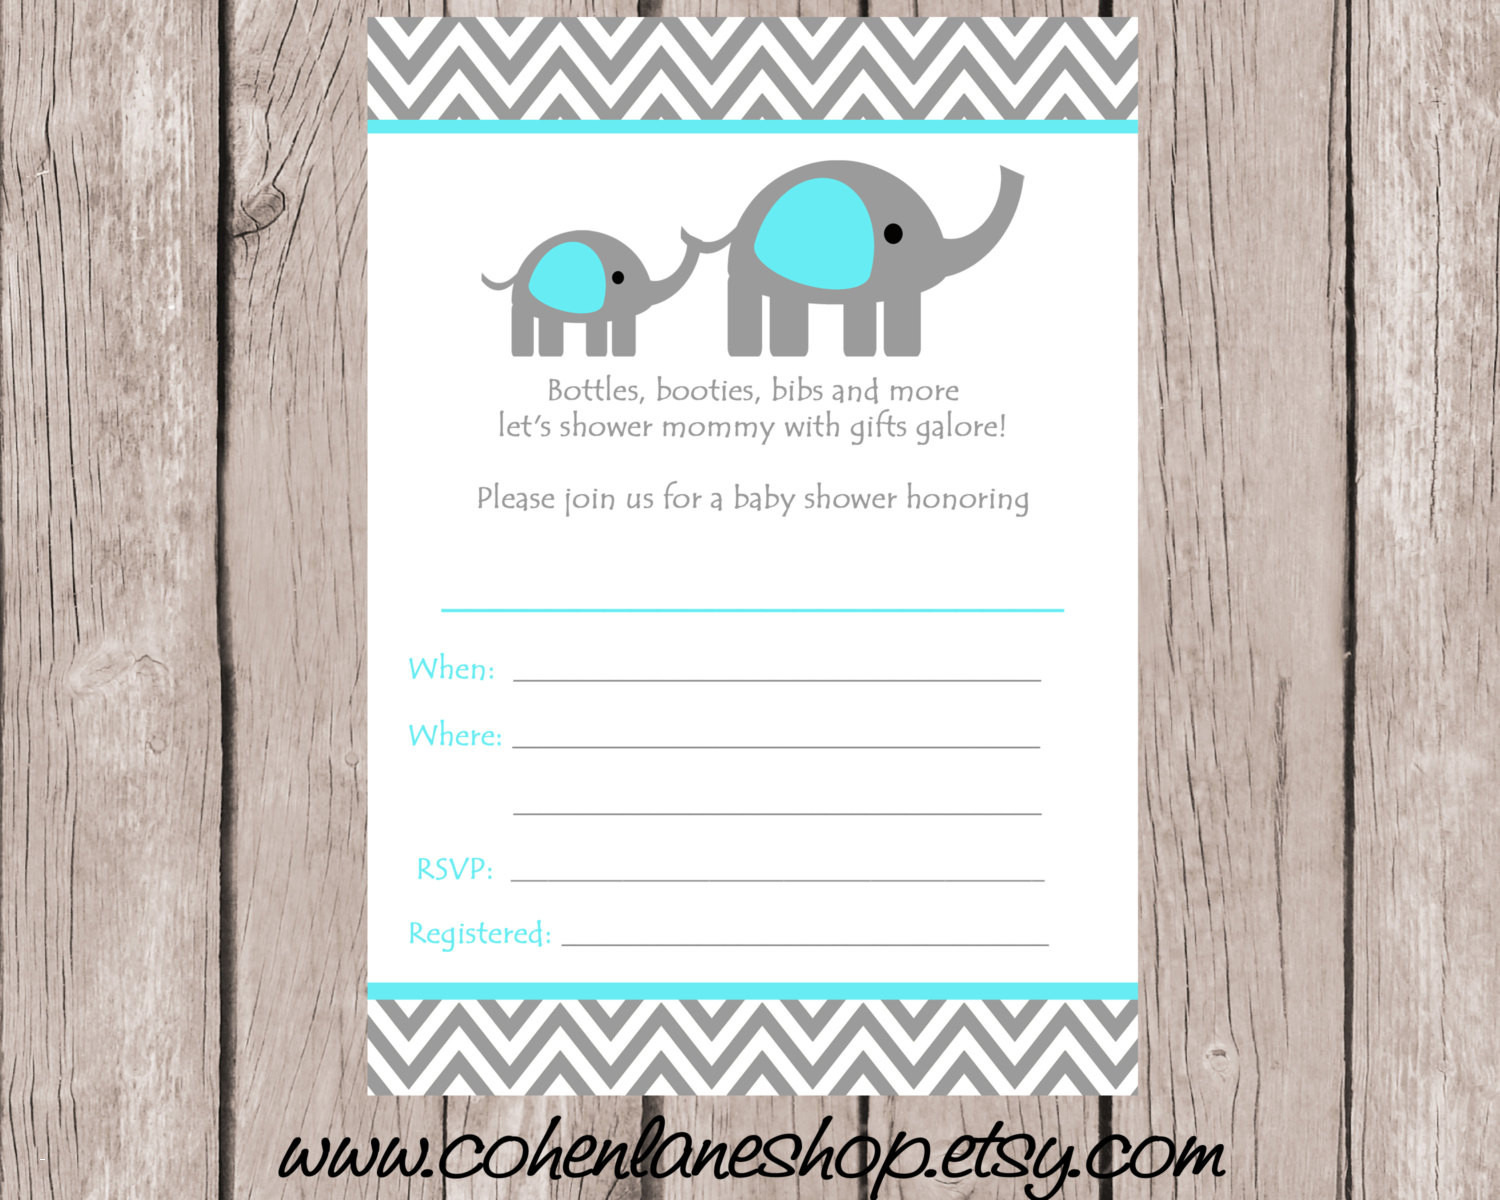 Full Size of Baby Shower:nautical Baby Shower Invitations For Boys Baby Girl Themes For Bedroom Baby Shower Ideas Baby Shower Decorations Themes For Baby Girl Nursery Baby Girl Party Plates Baby Shower Invitations For Girls Creative Baby Shower Ideas Baby Girl Themes For Bedroom